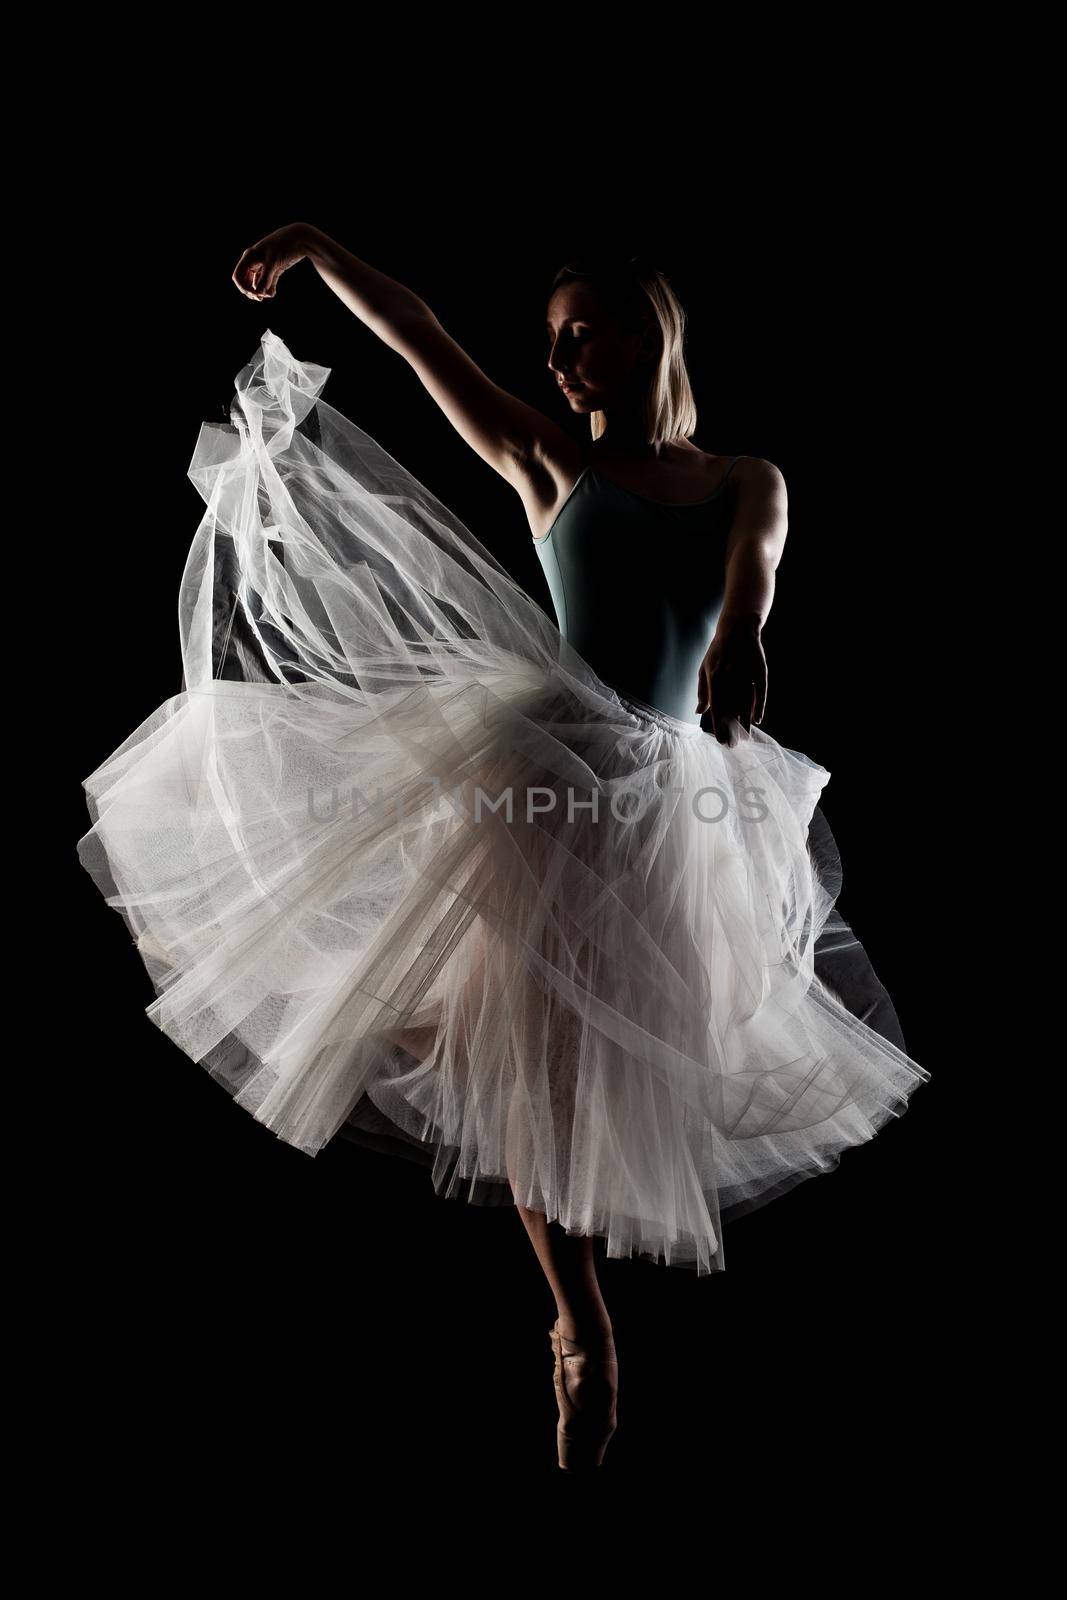 ballerina with a white dress and black top posing on black background